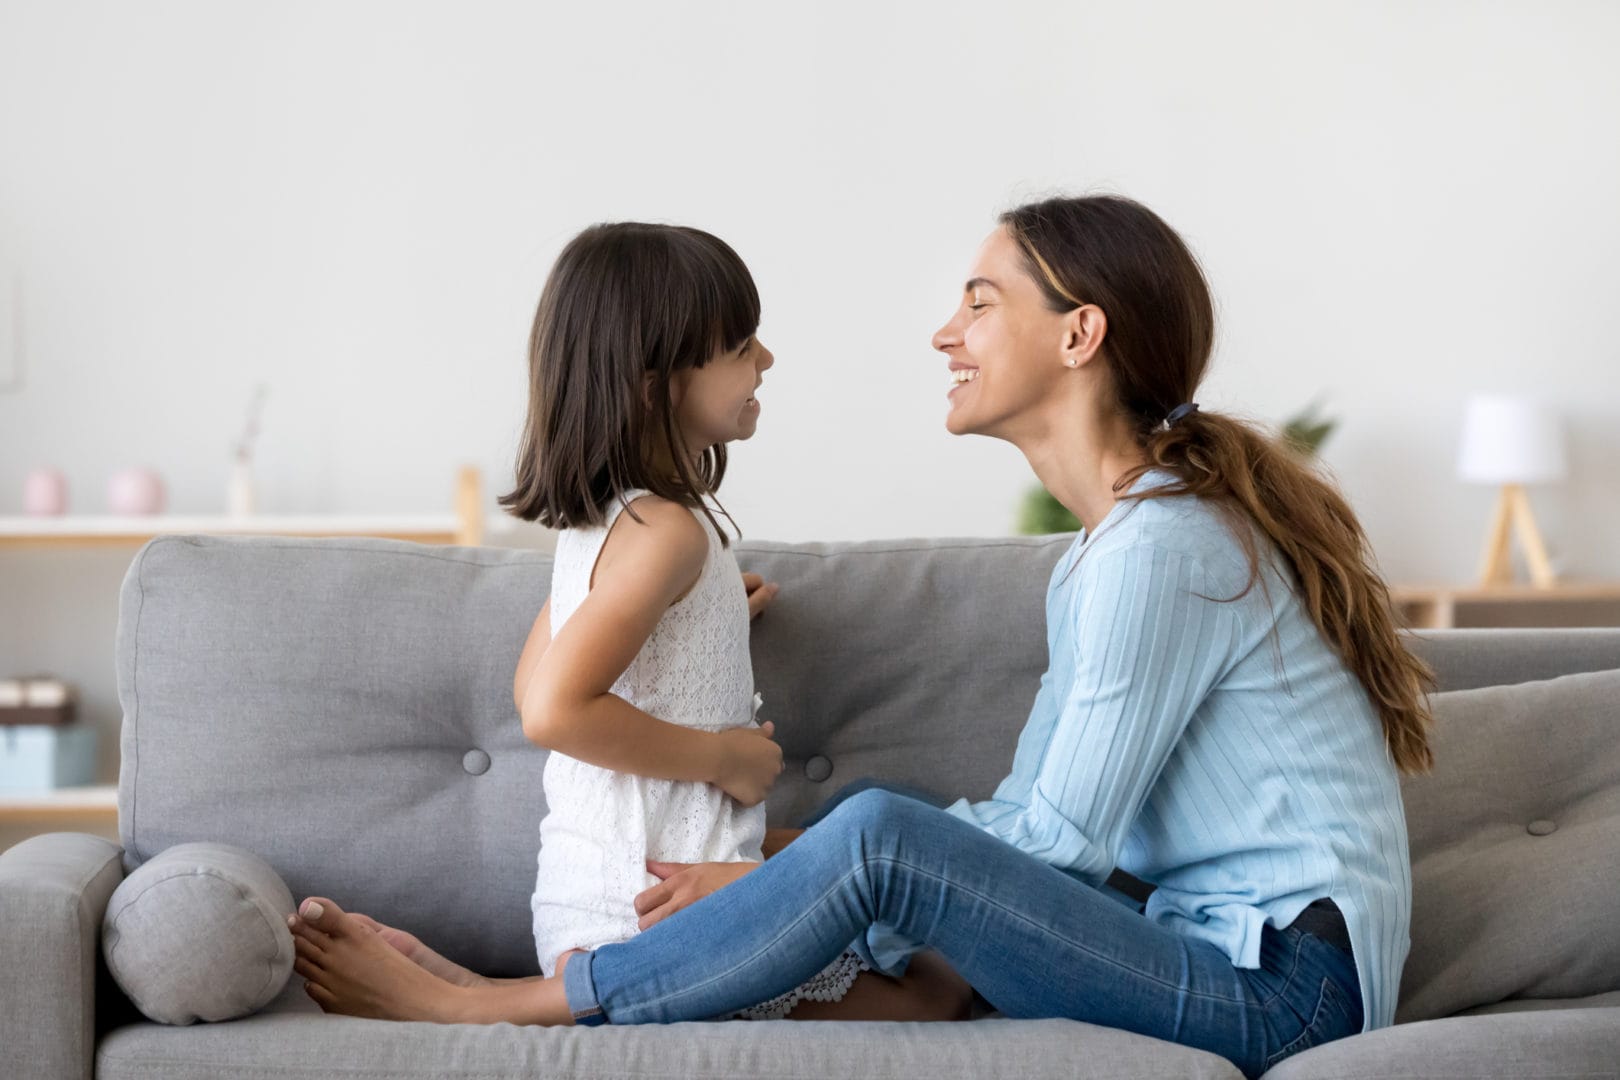 How to talk to kids: babysitting tips from a pro